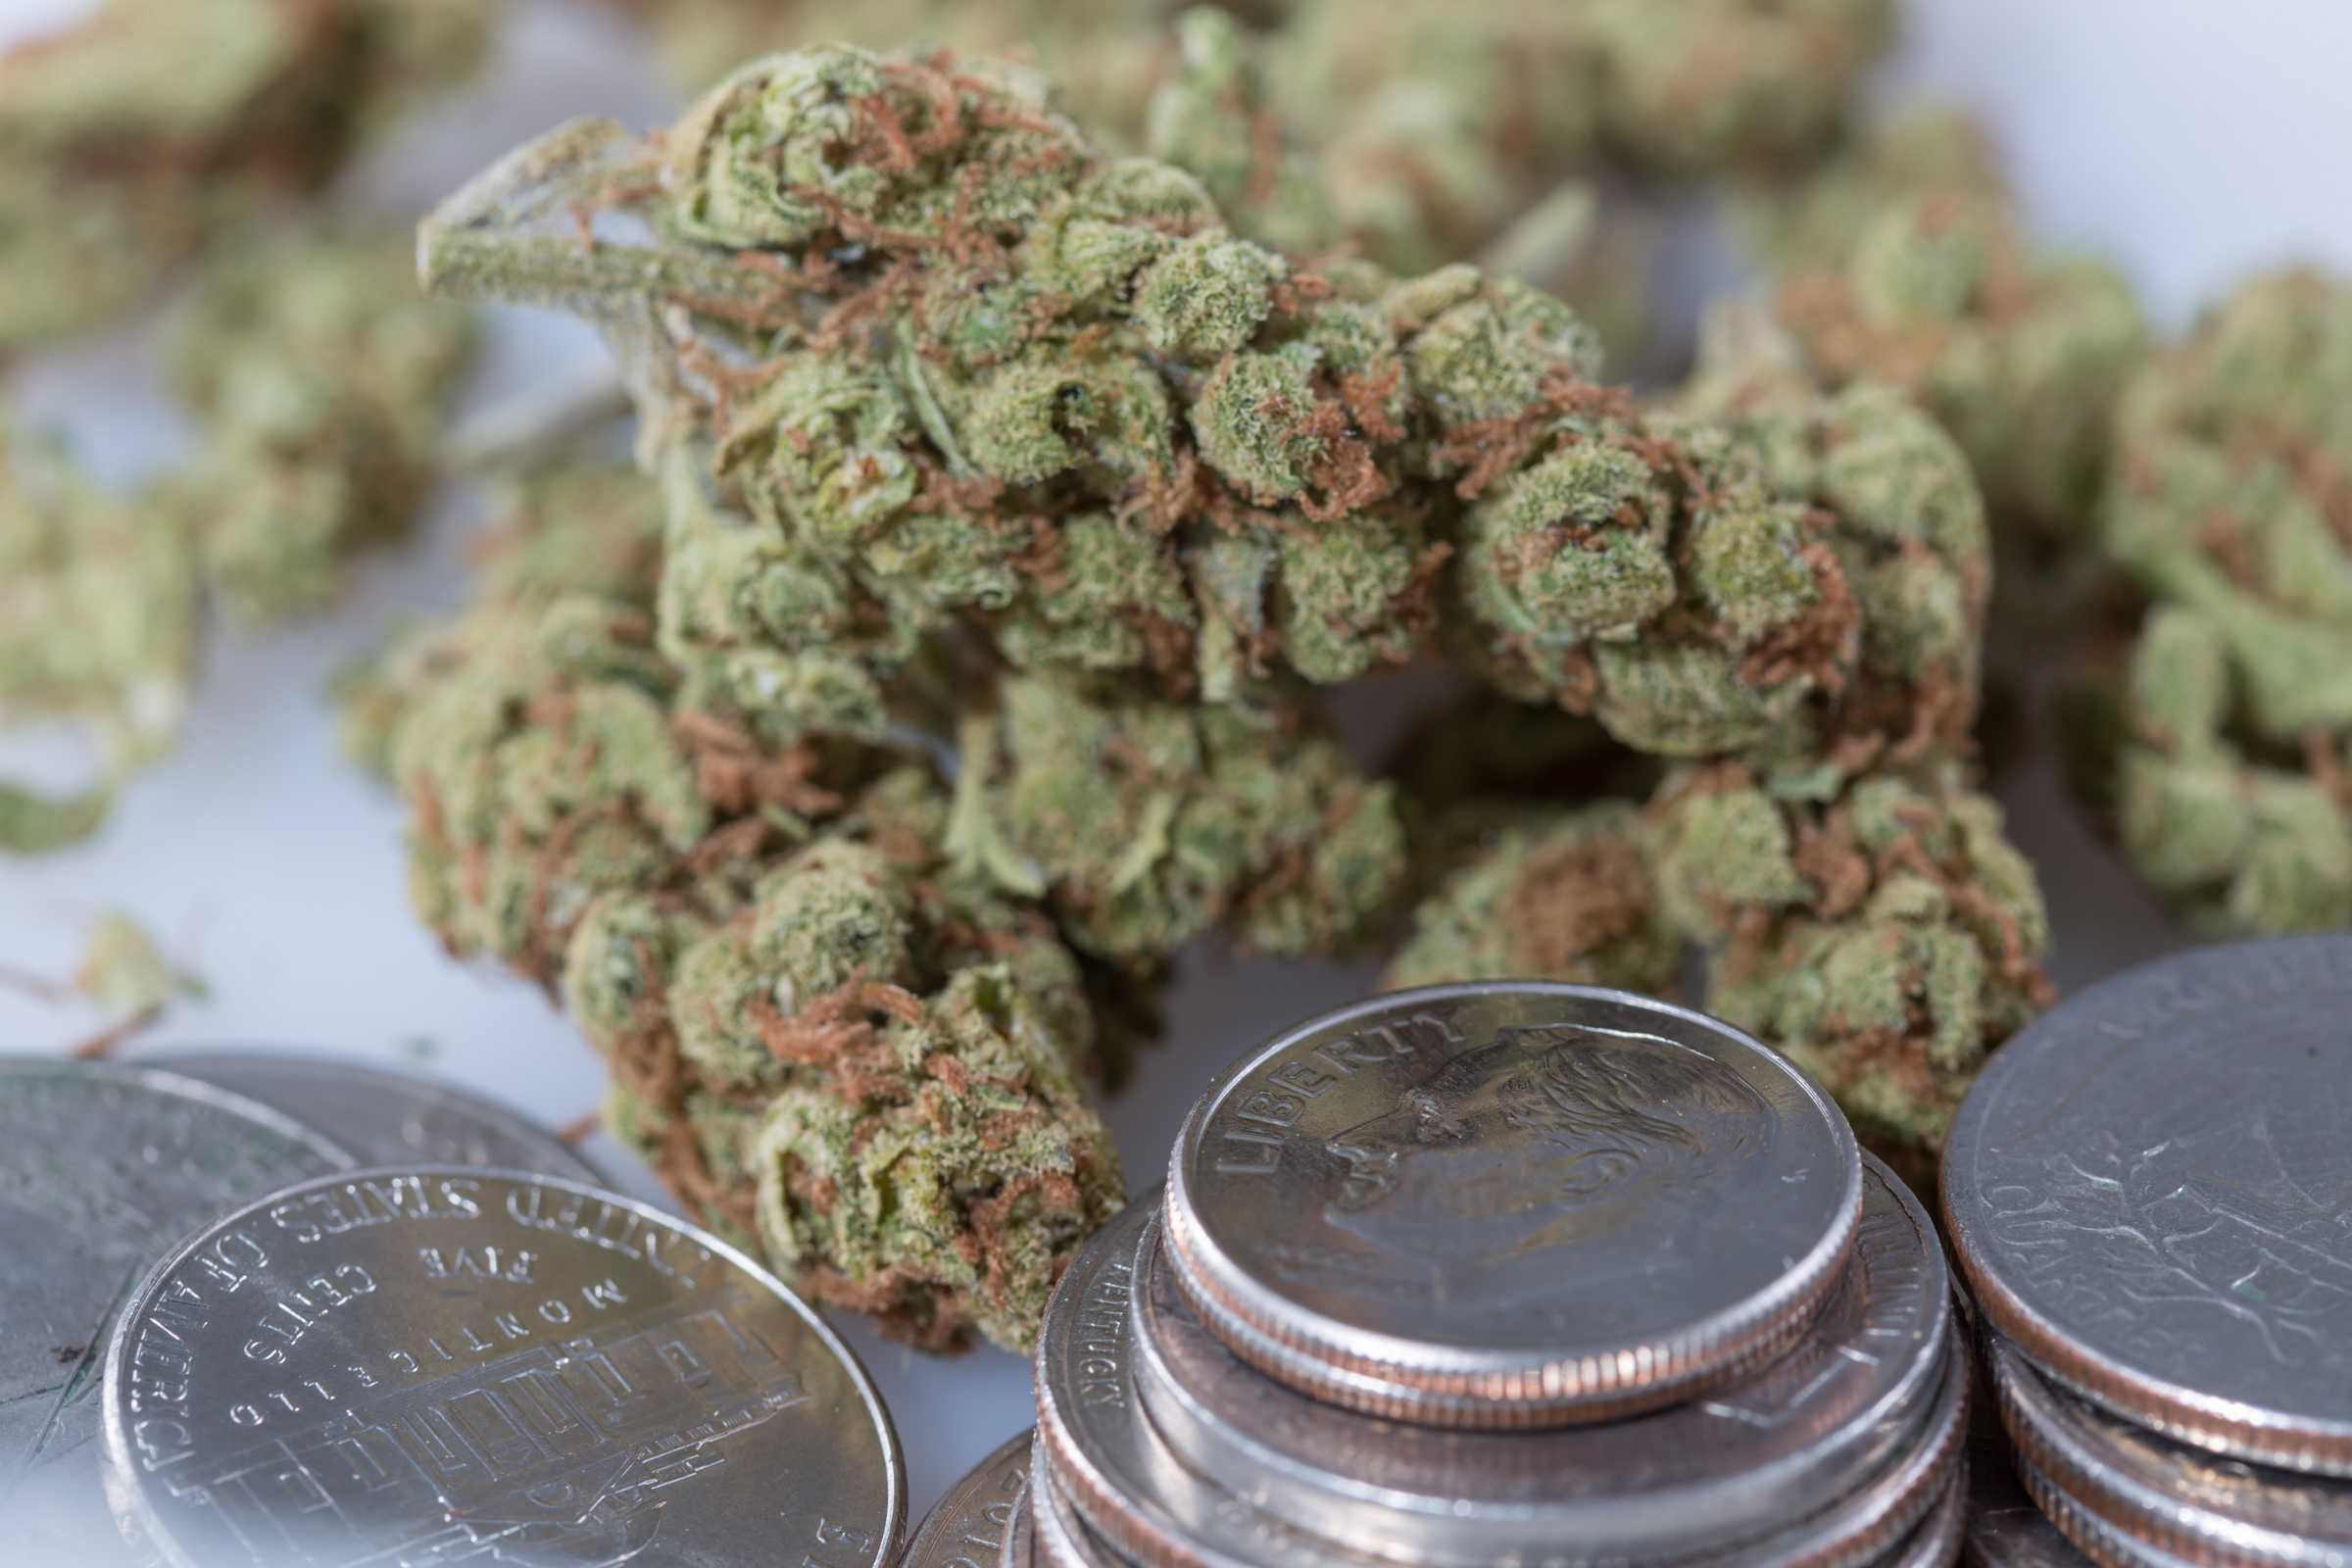 Americans Want Congress To Pass Marijuana Banking Bill, Poll From American Bankers Association Poll Finds